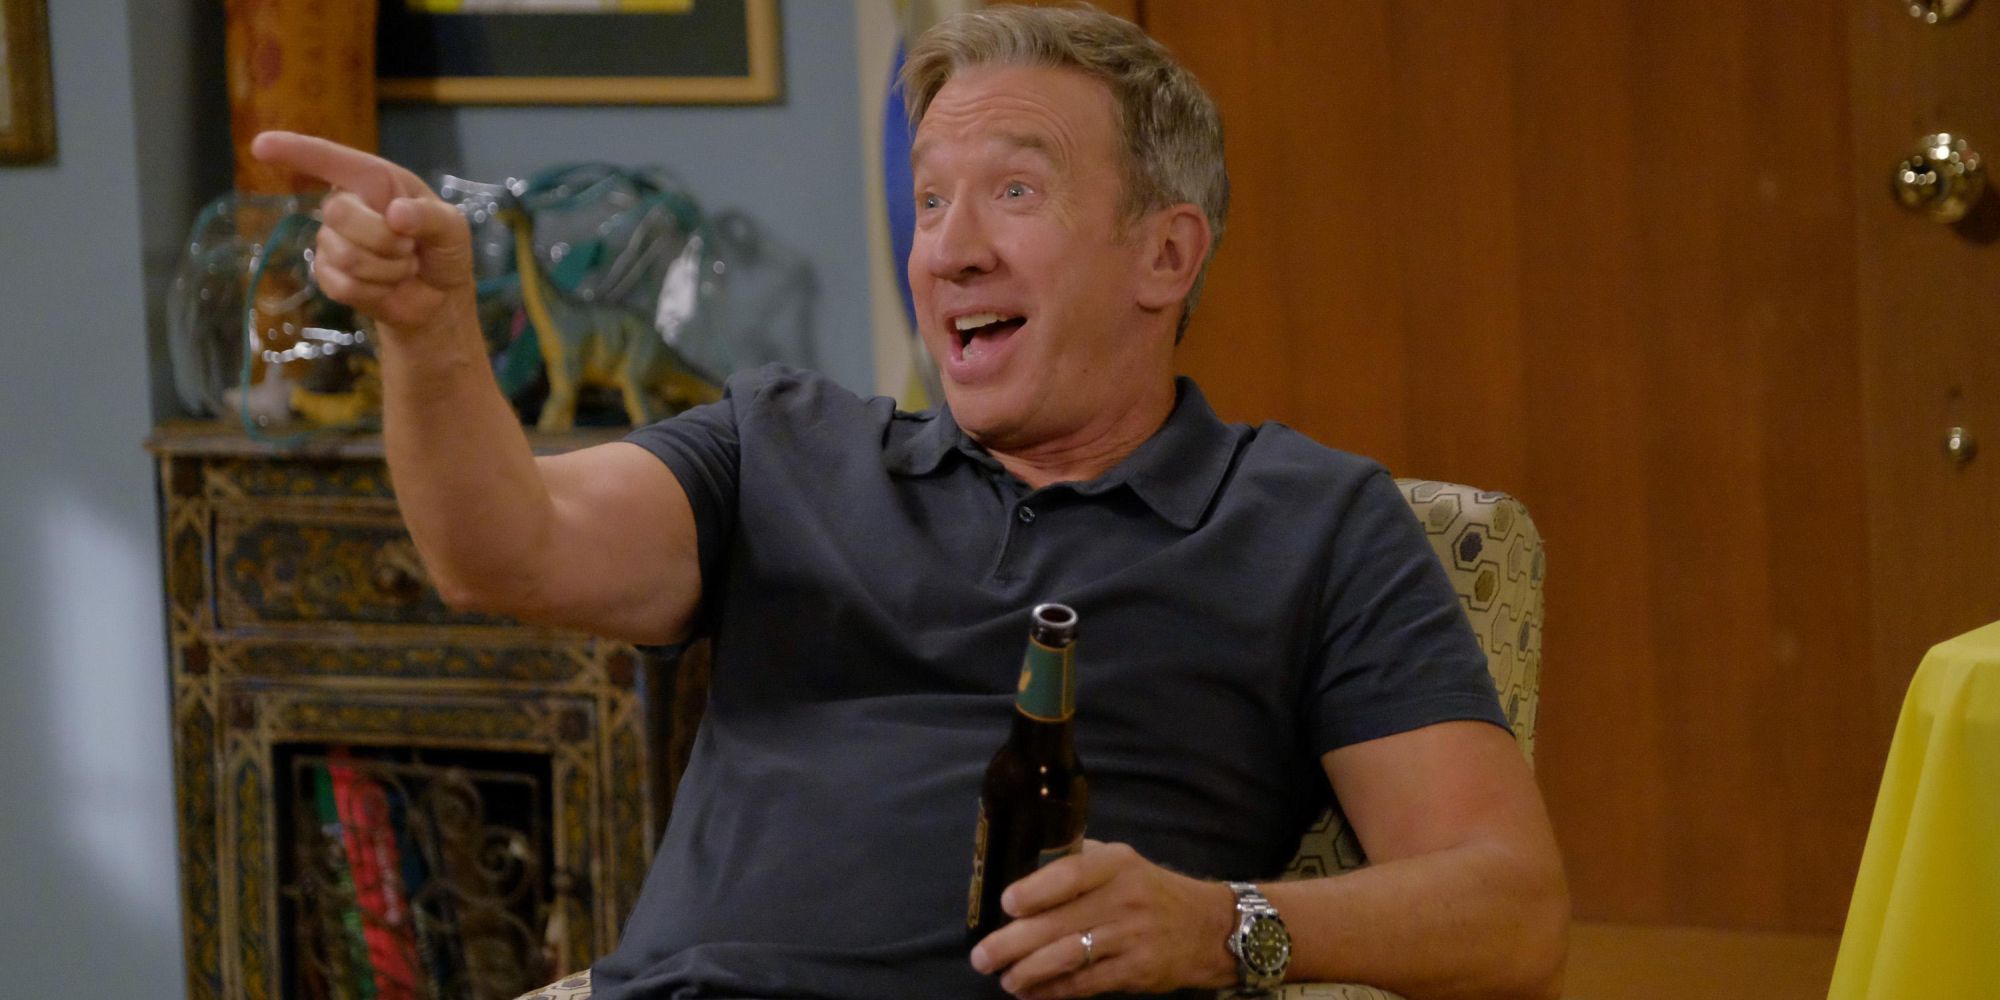 Tim Allen on Last Man Standing holding a beer and pointing while sitting down